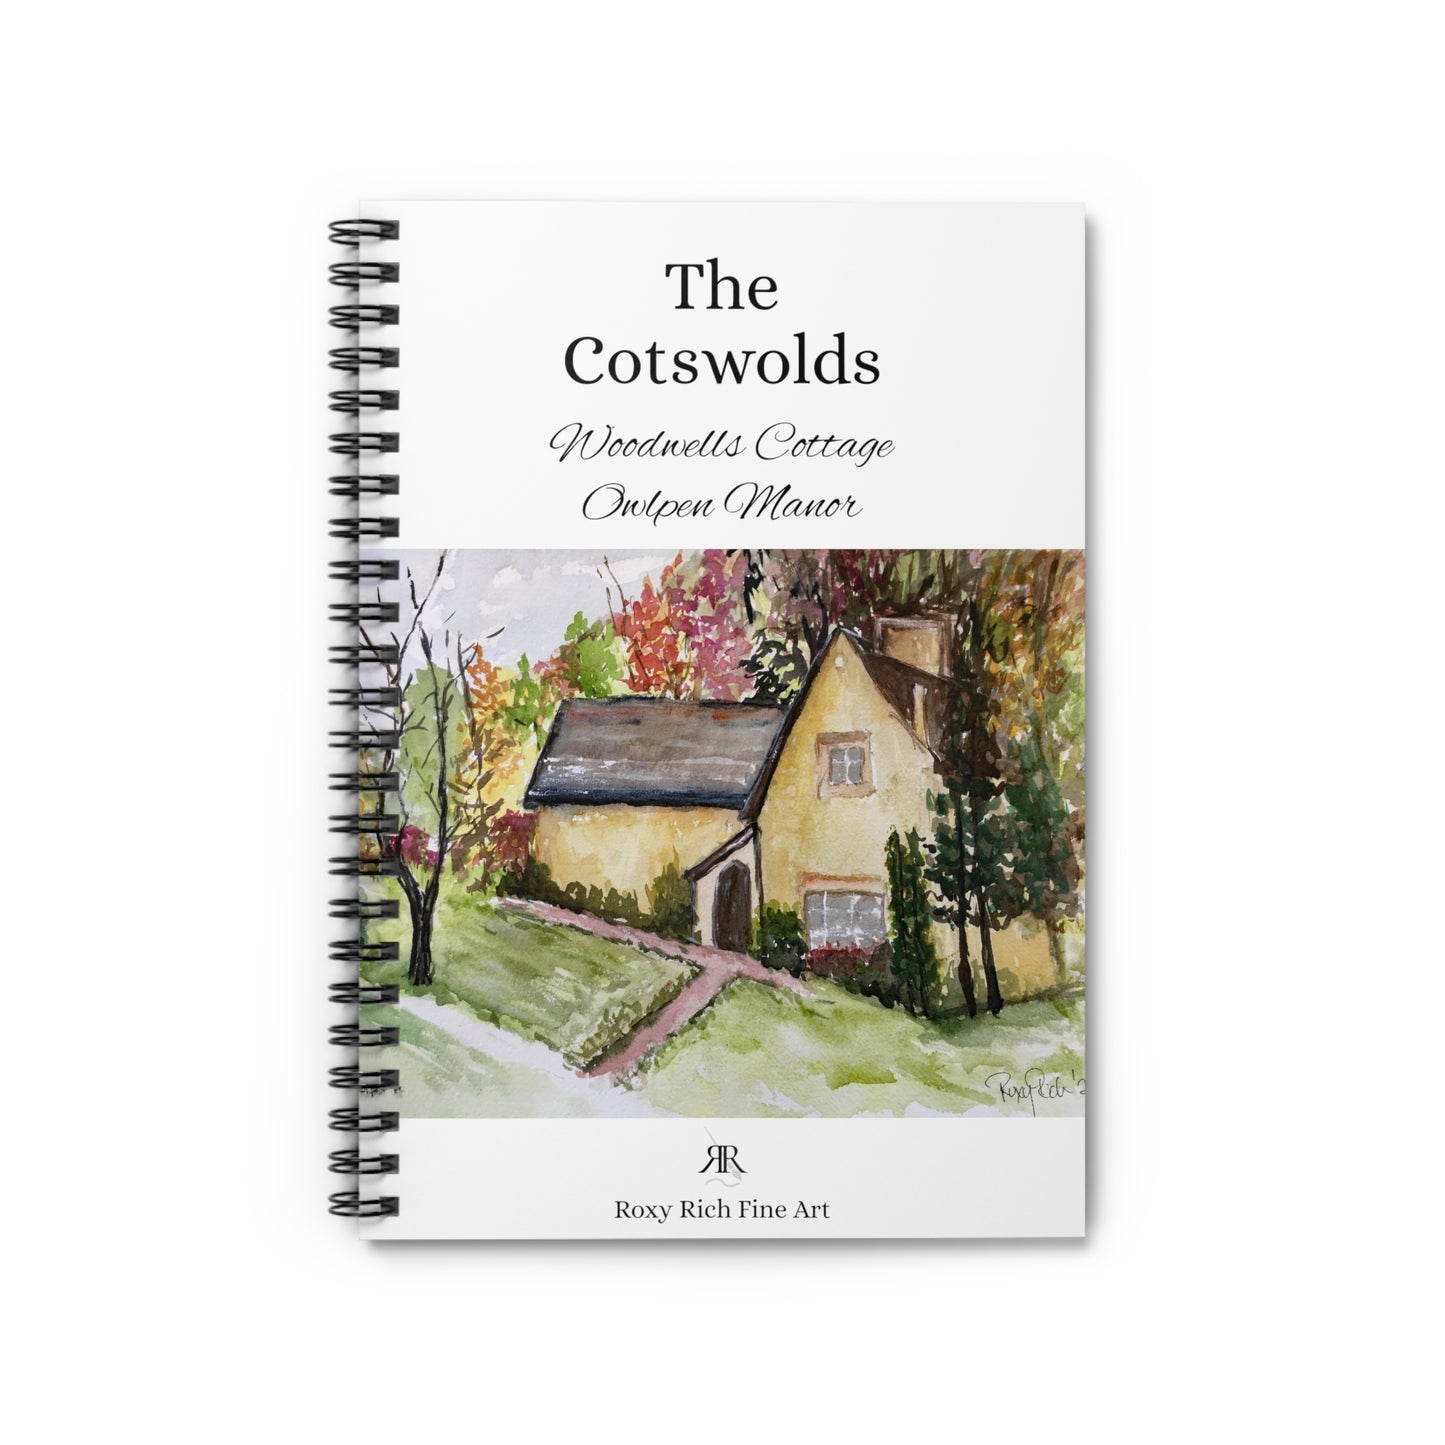 Woodwells Cottage at Owlpen Manor "The Cotswolds" Spiral Notebook